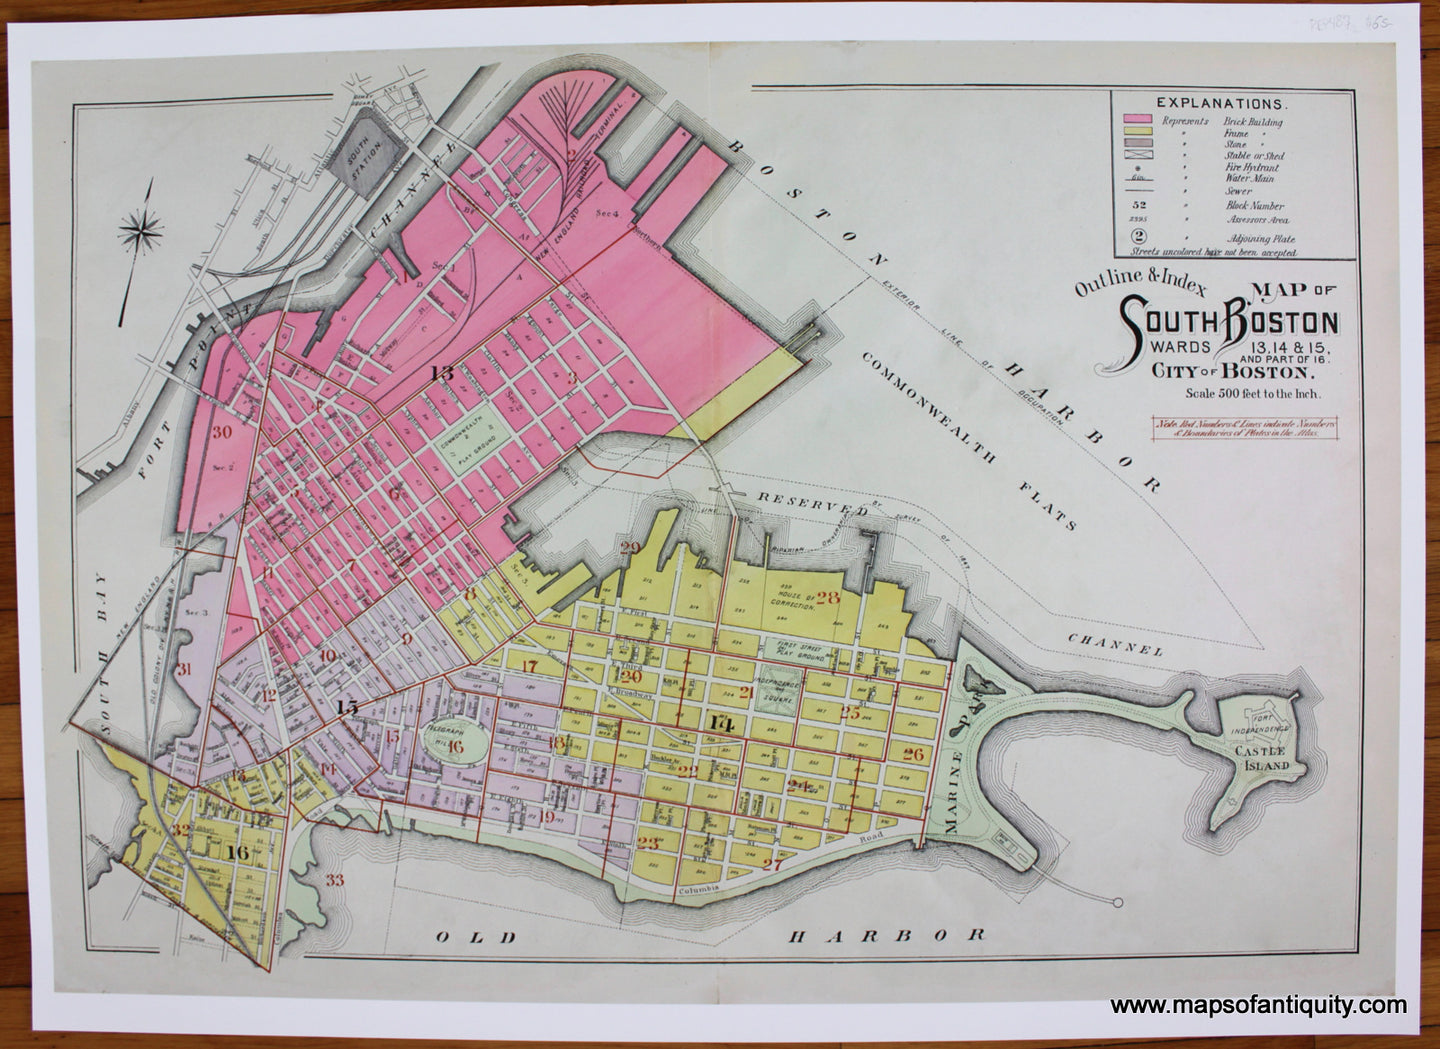 Print-Prints-Reproduction-Reproductions-Outline-&-Index-Map-of-South-Boston-Wards-13-14-15-and-part-of-16-City-of-Boston-Massachusetts-Mass-MA-Maps-of-Antiquity